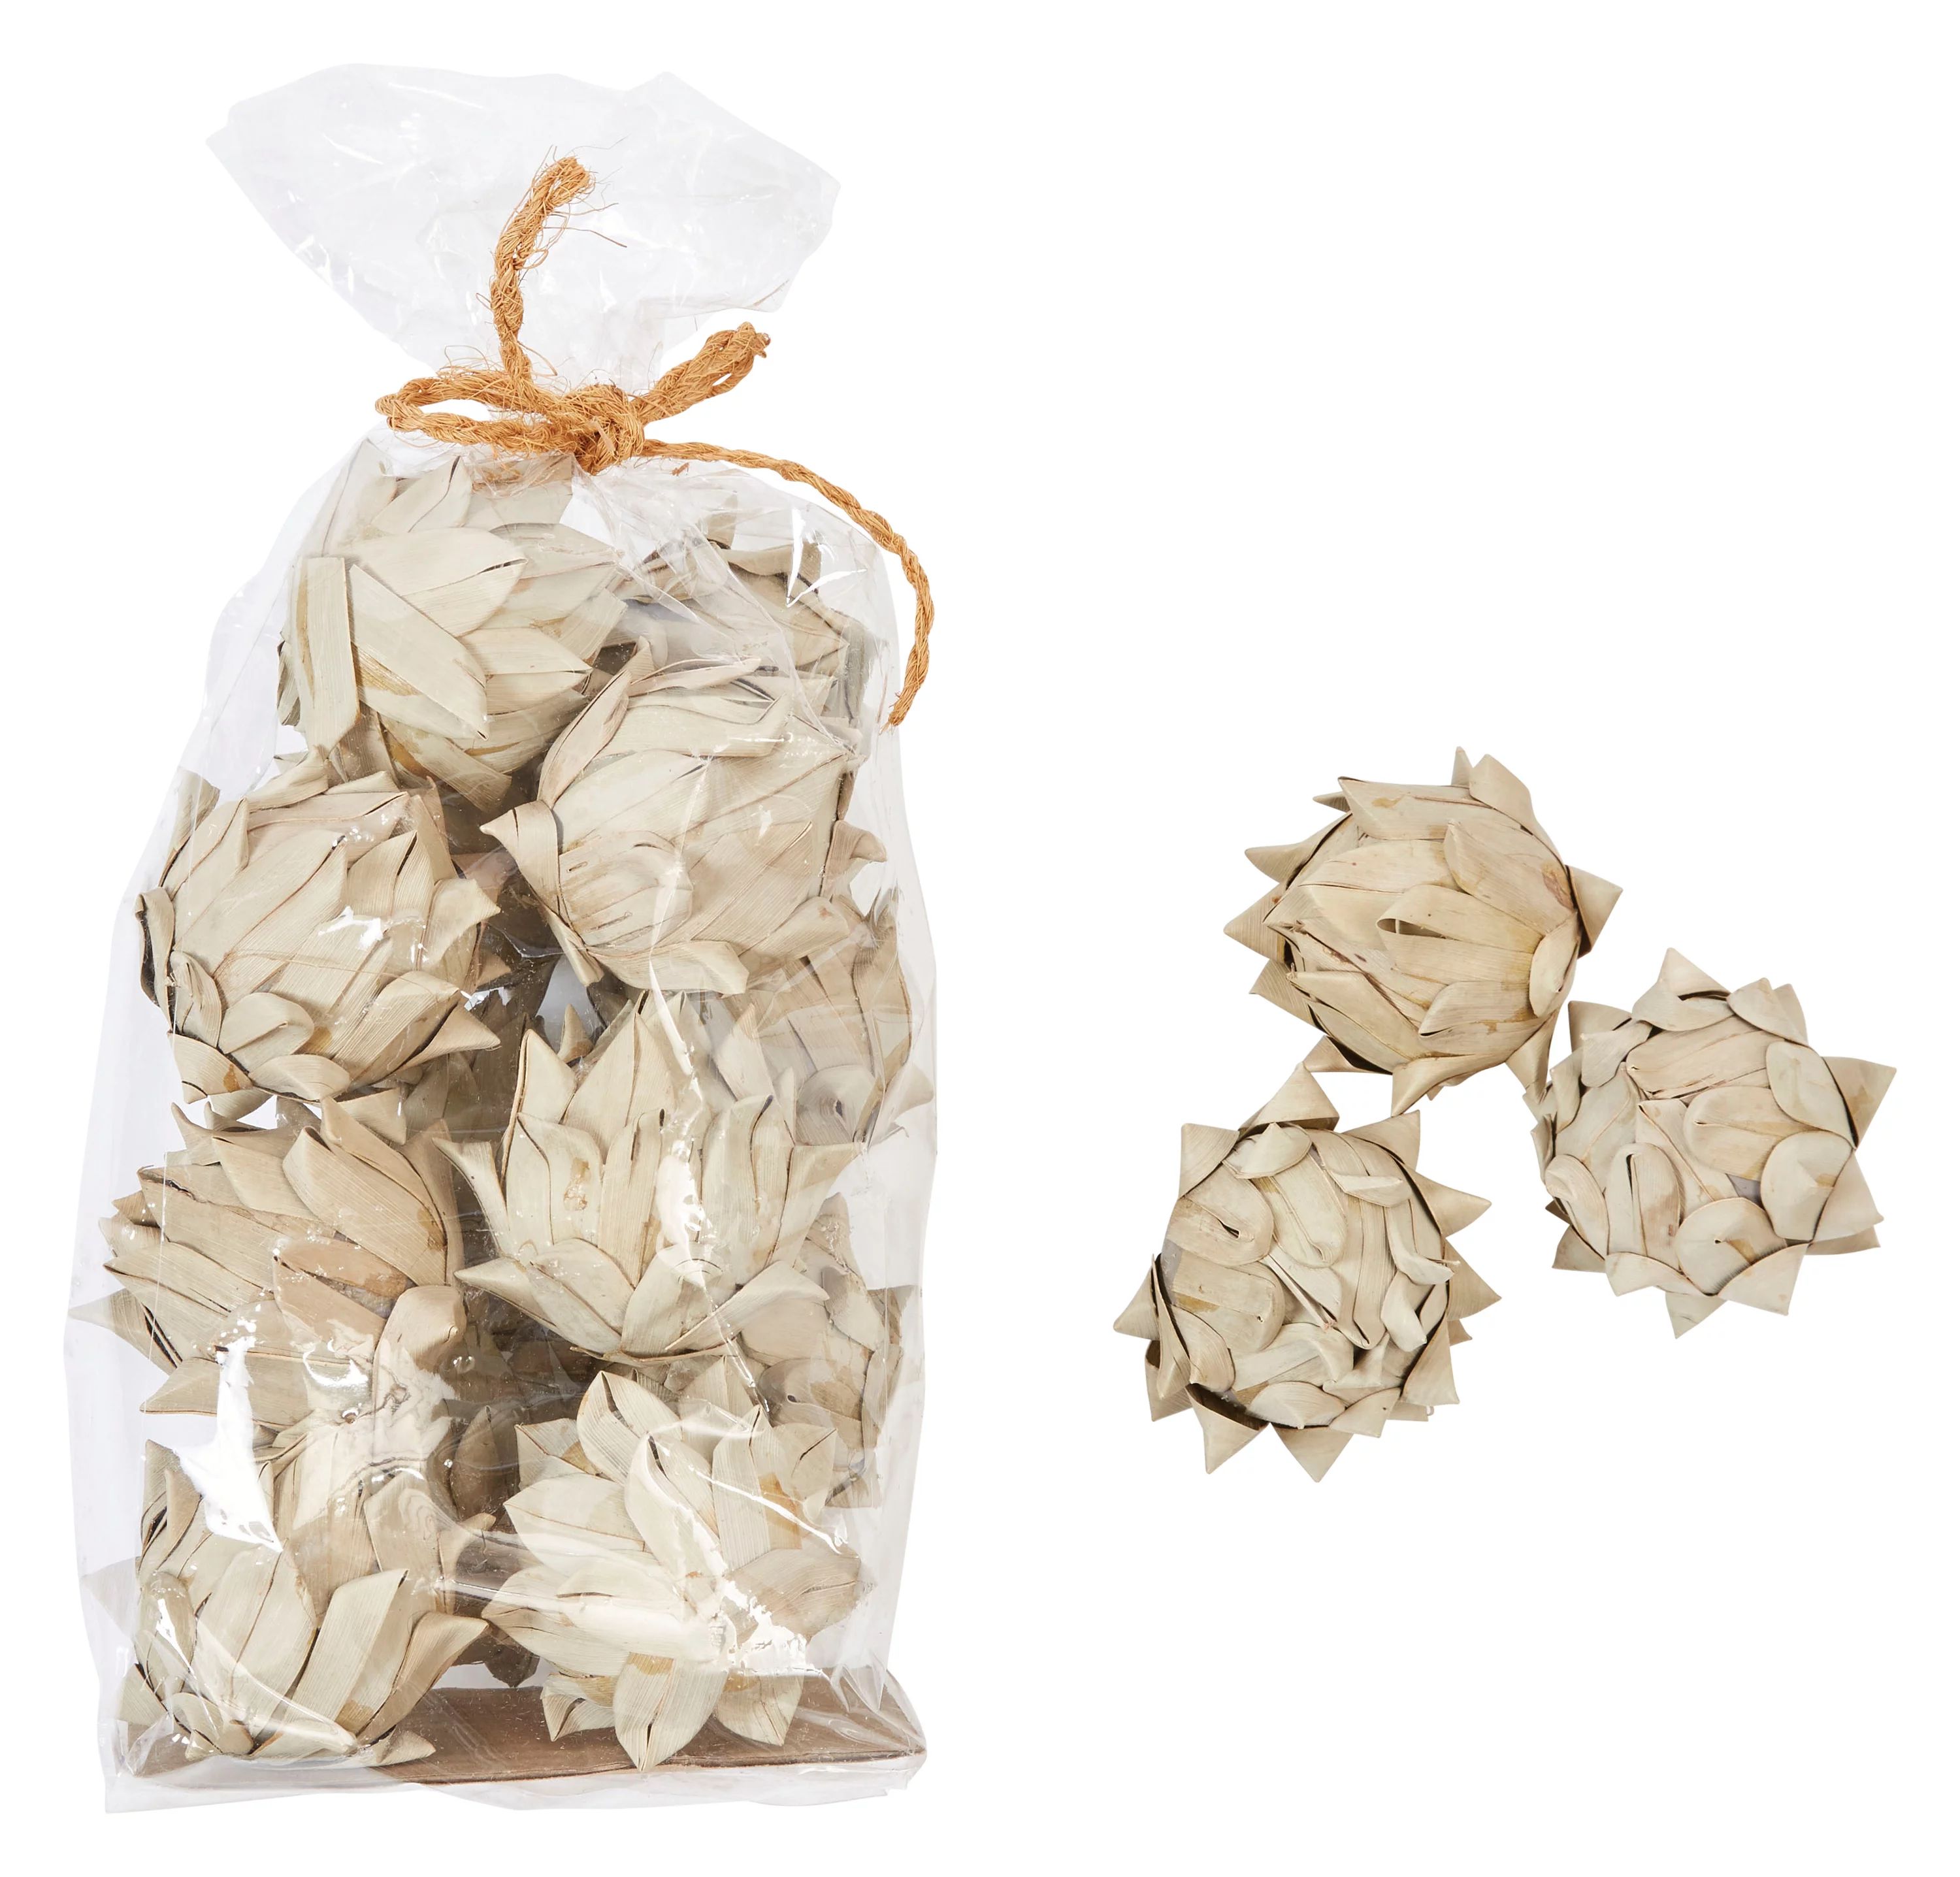 Creative Co-Op Approximately 3"H Handmade Dried Natural Palm Leaf Artichoke in Bag (Contains 13 P... | Walmart (US)